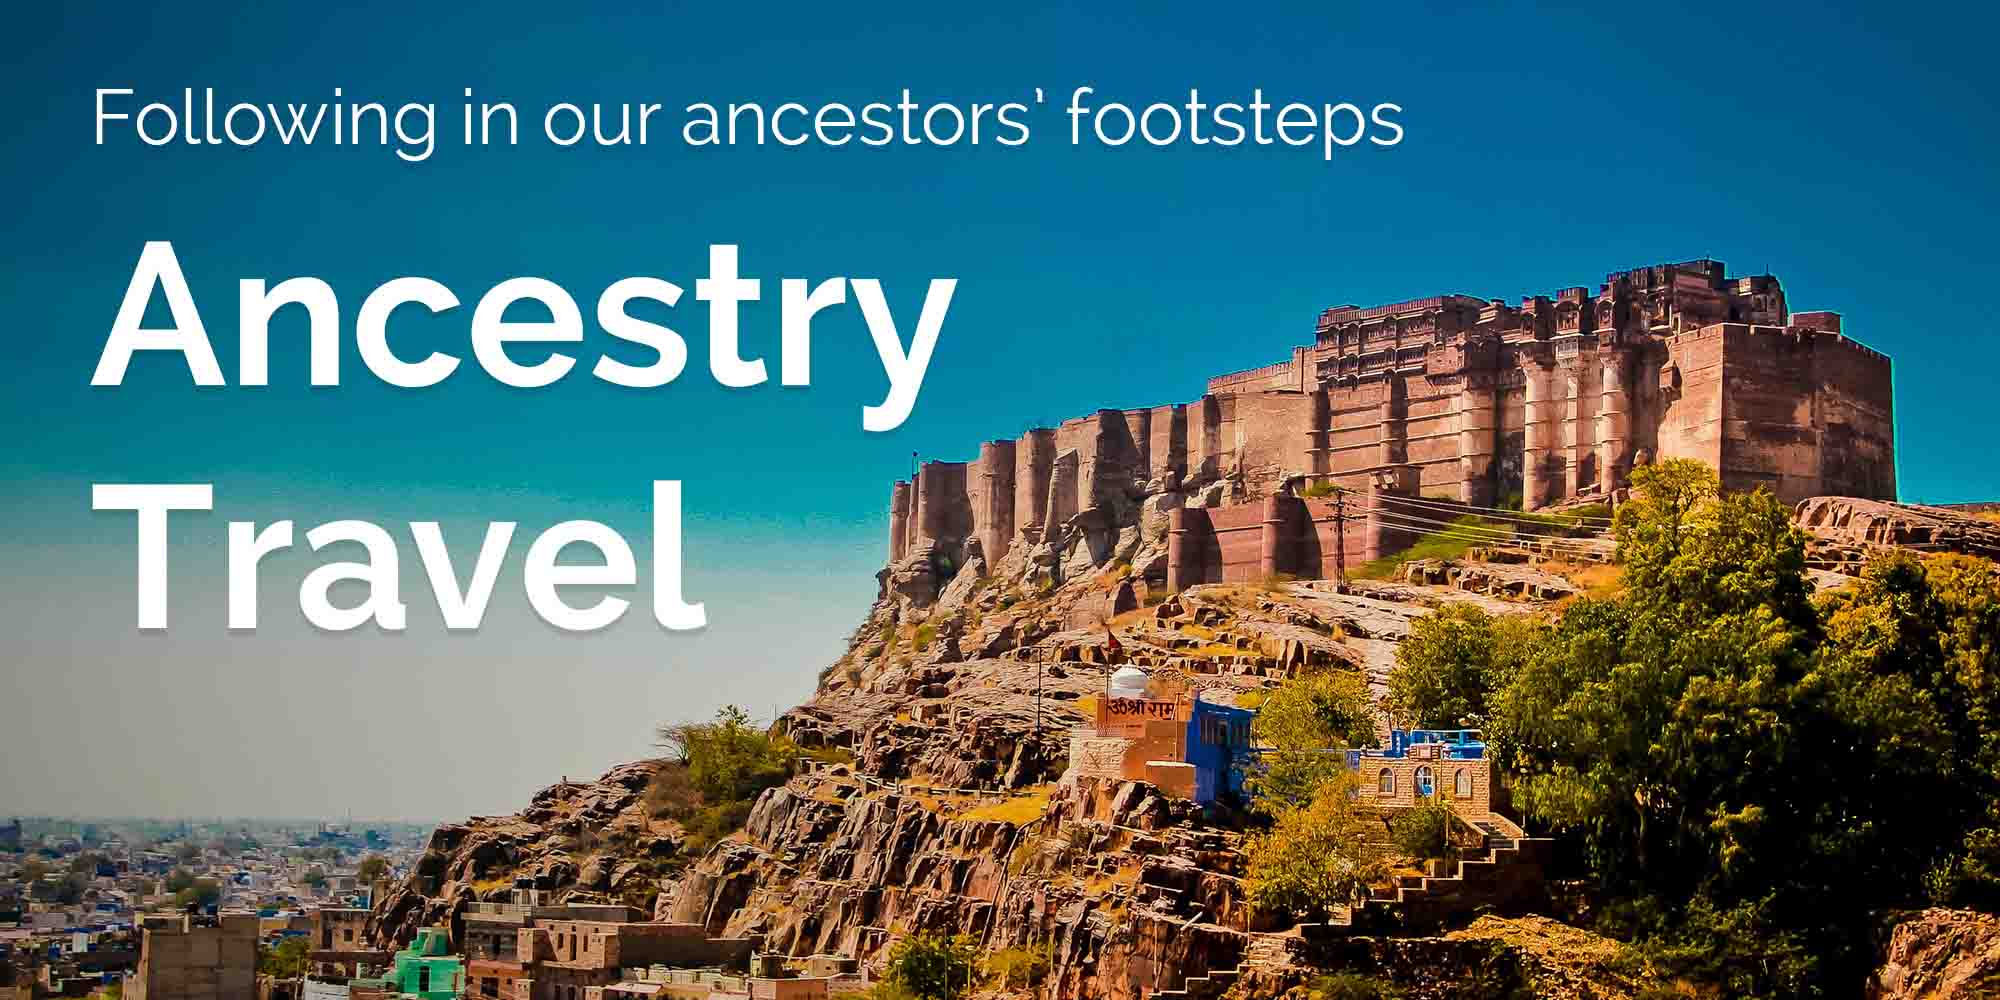 following in our ancestors' footsteps